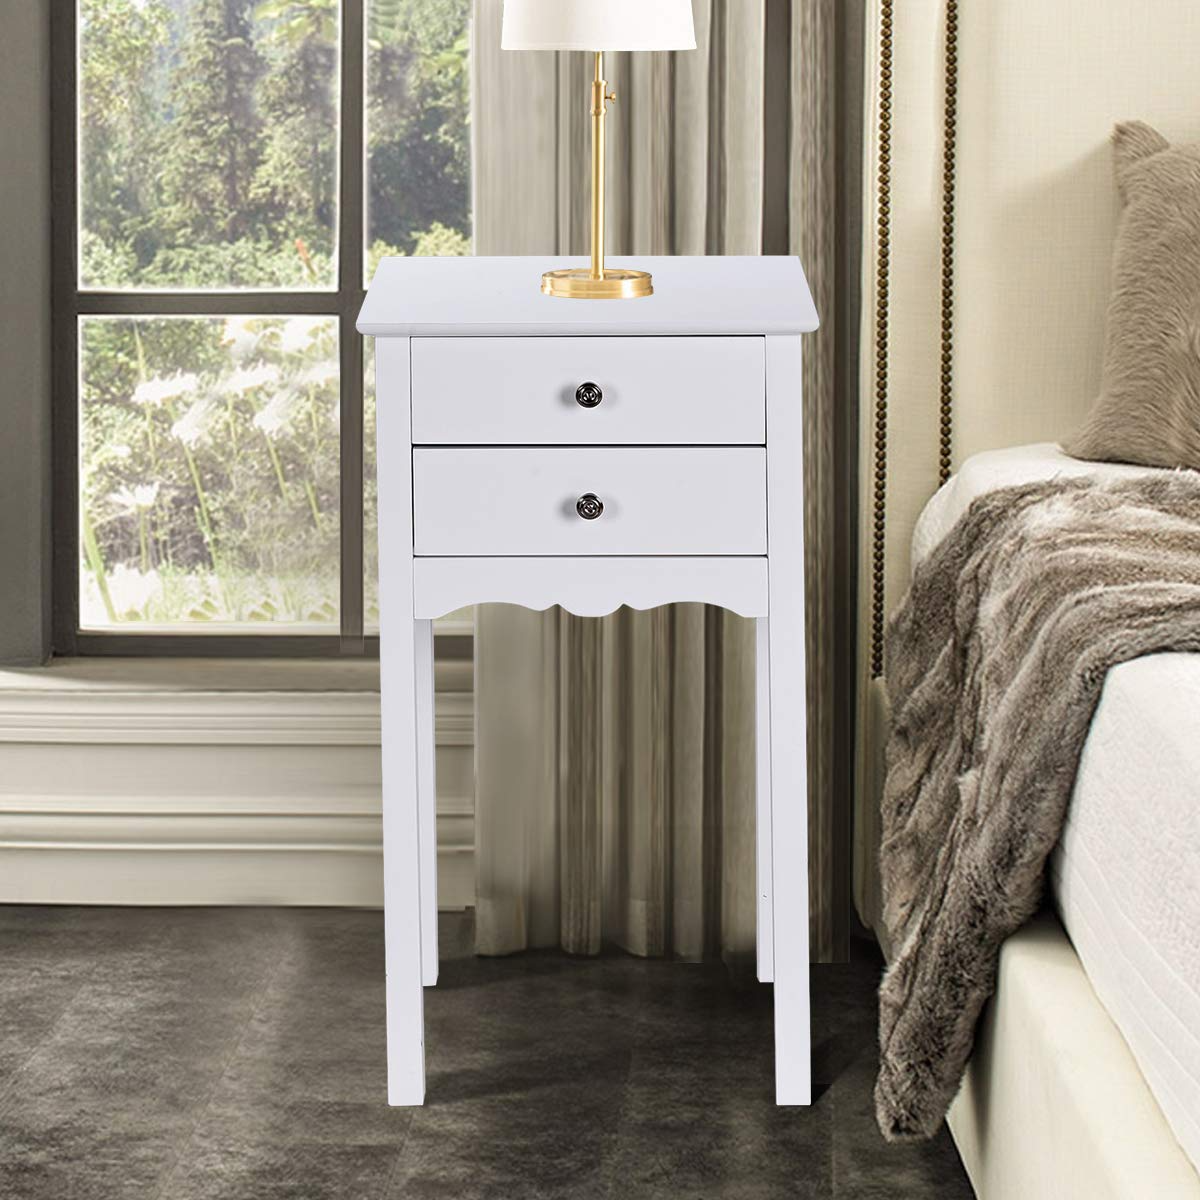 Giantex End Table w/ 2 Drawers Side Table Nightstand Multi-Purpose Accent Table Living Room Bedroom Home Furniture